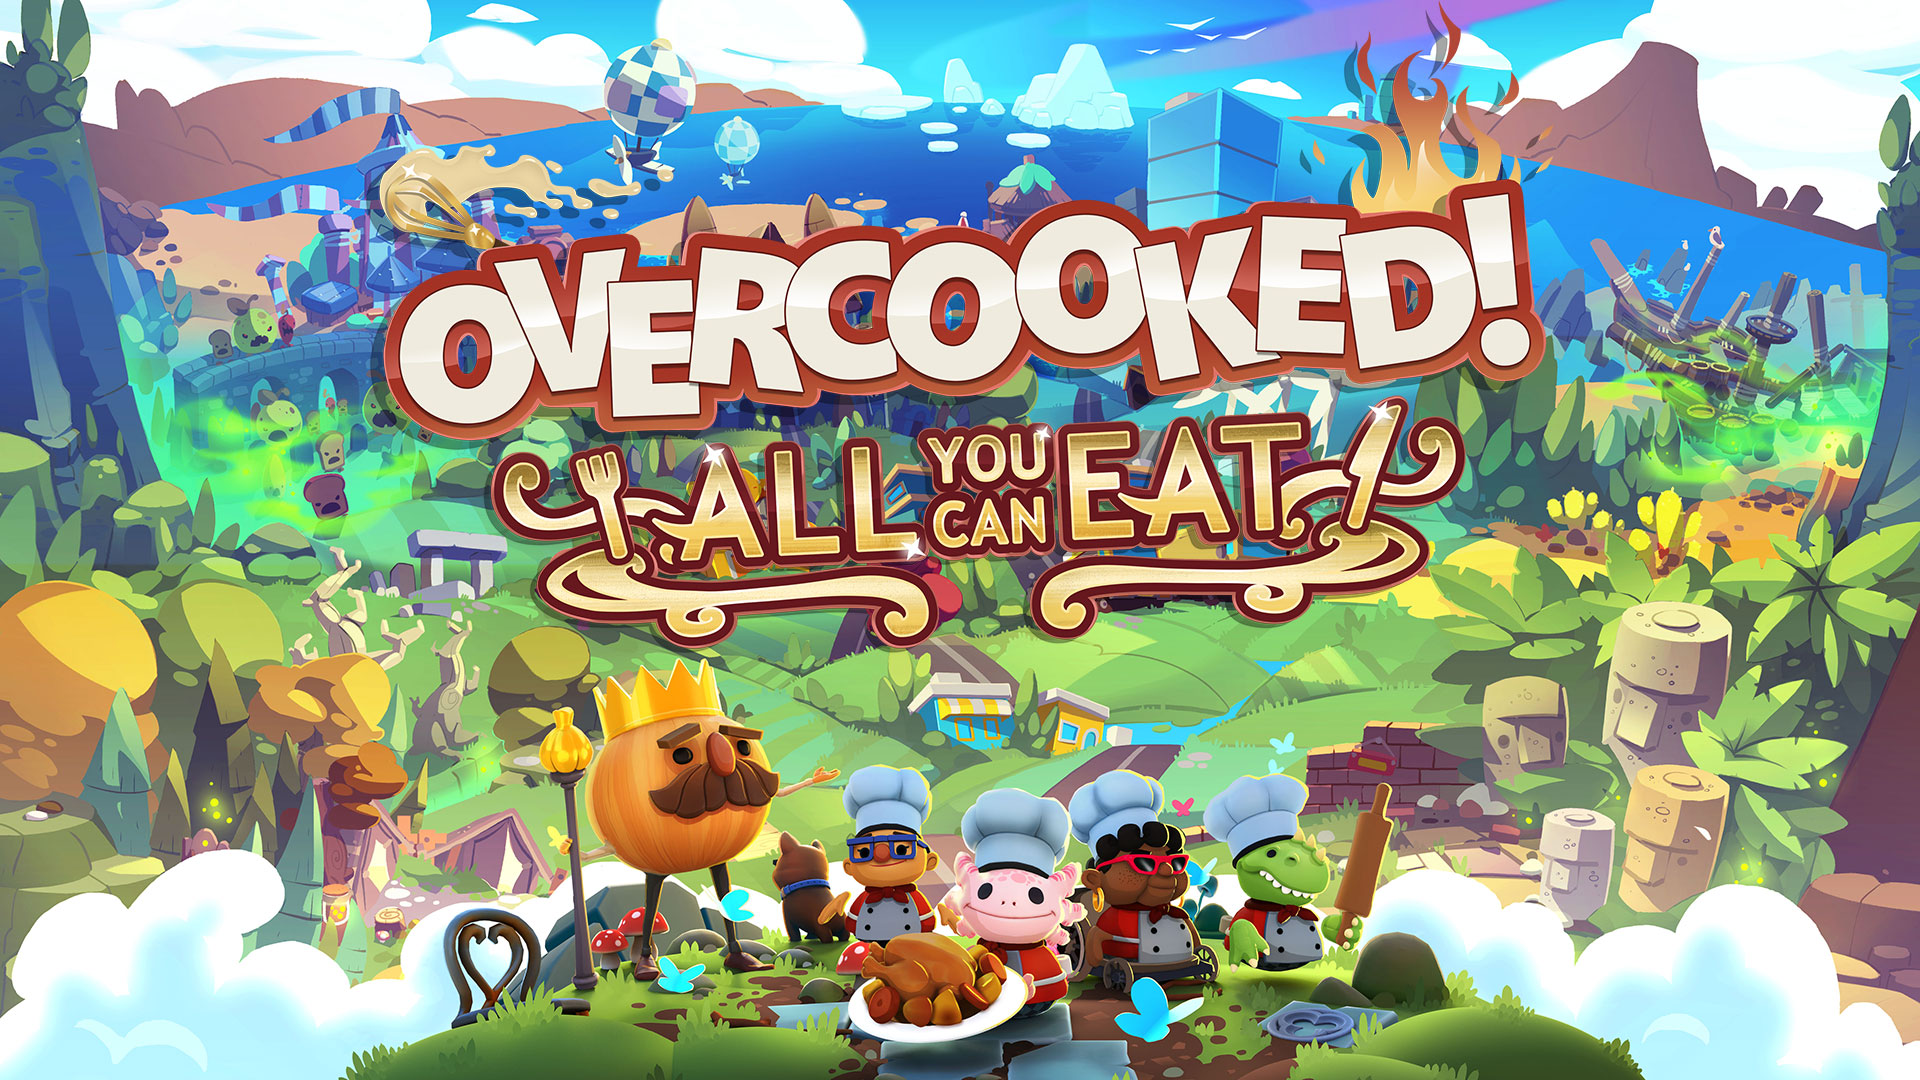  Overcooked! All You Can Eat - PlayStation 5 : Ui